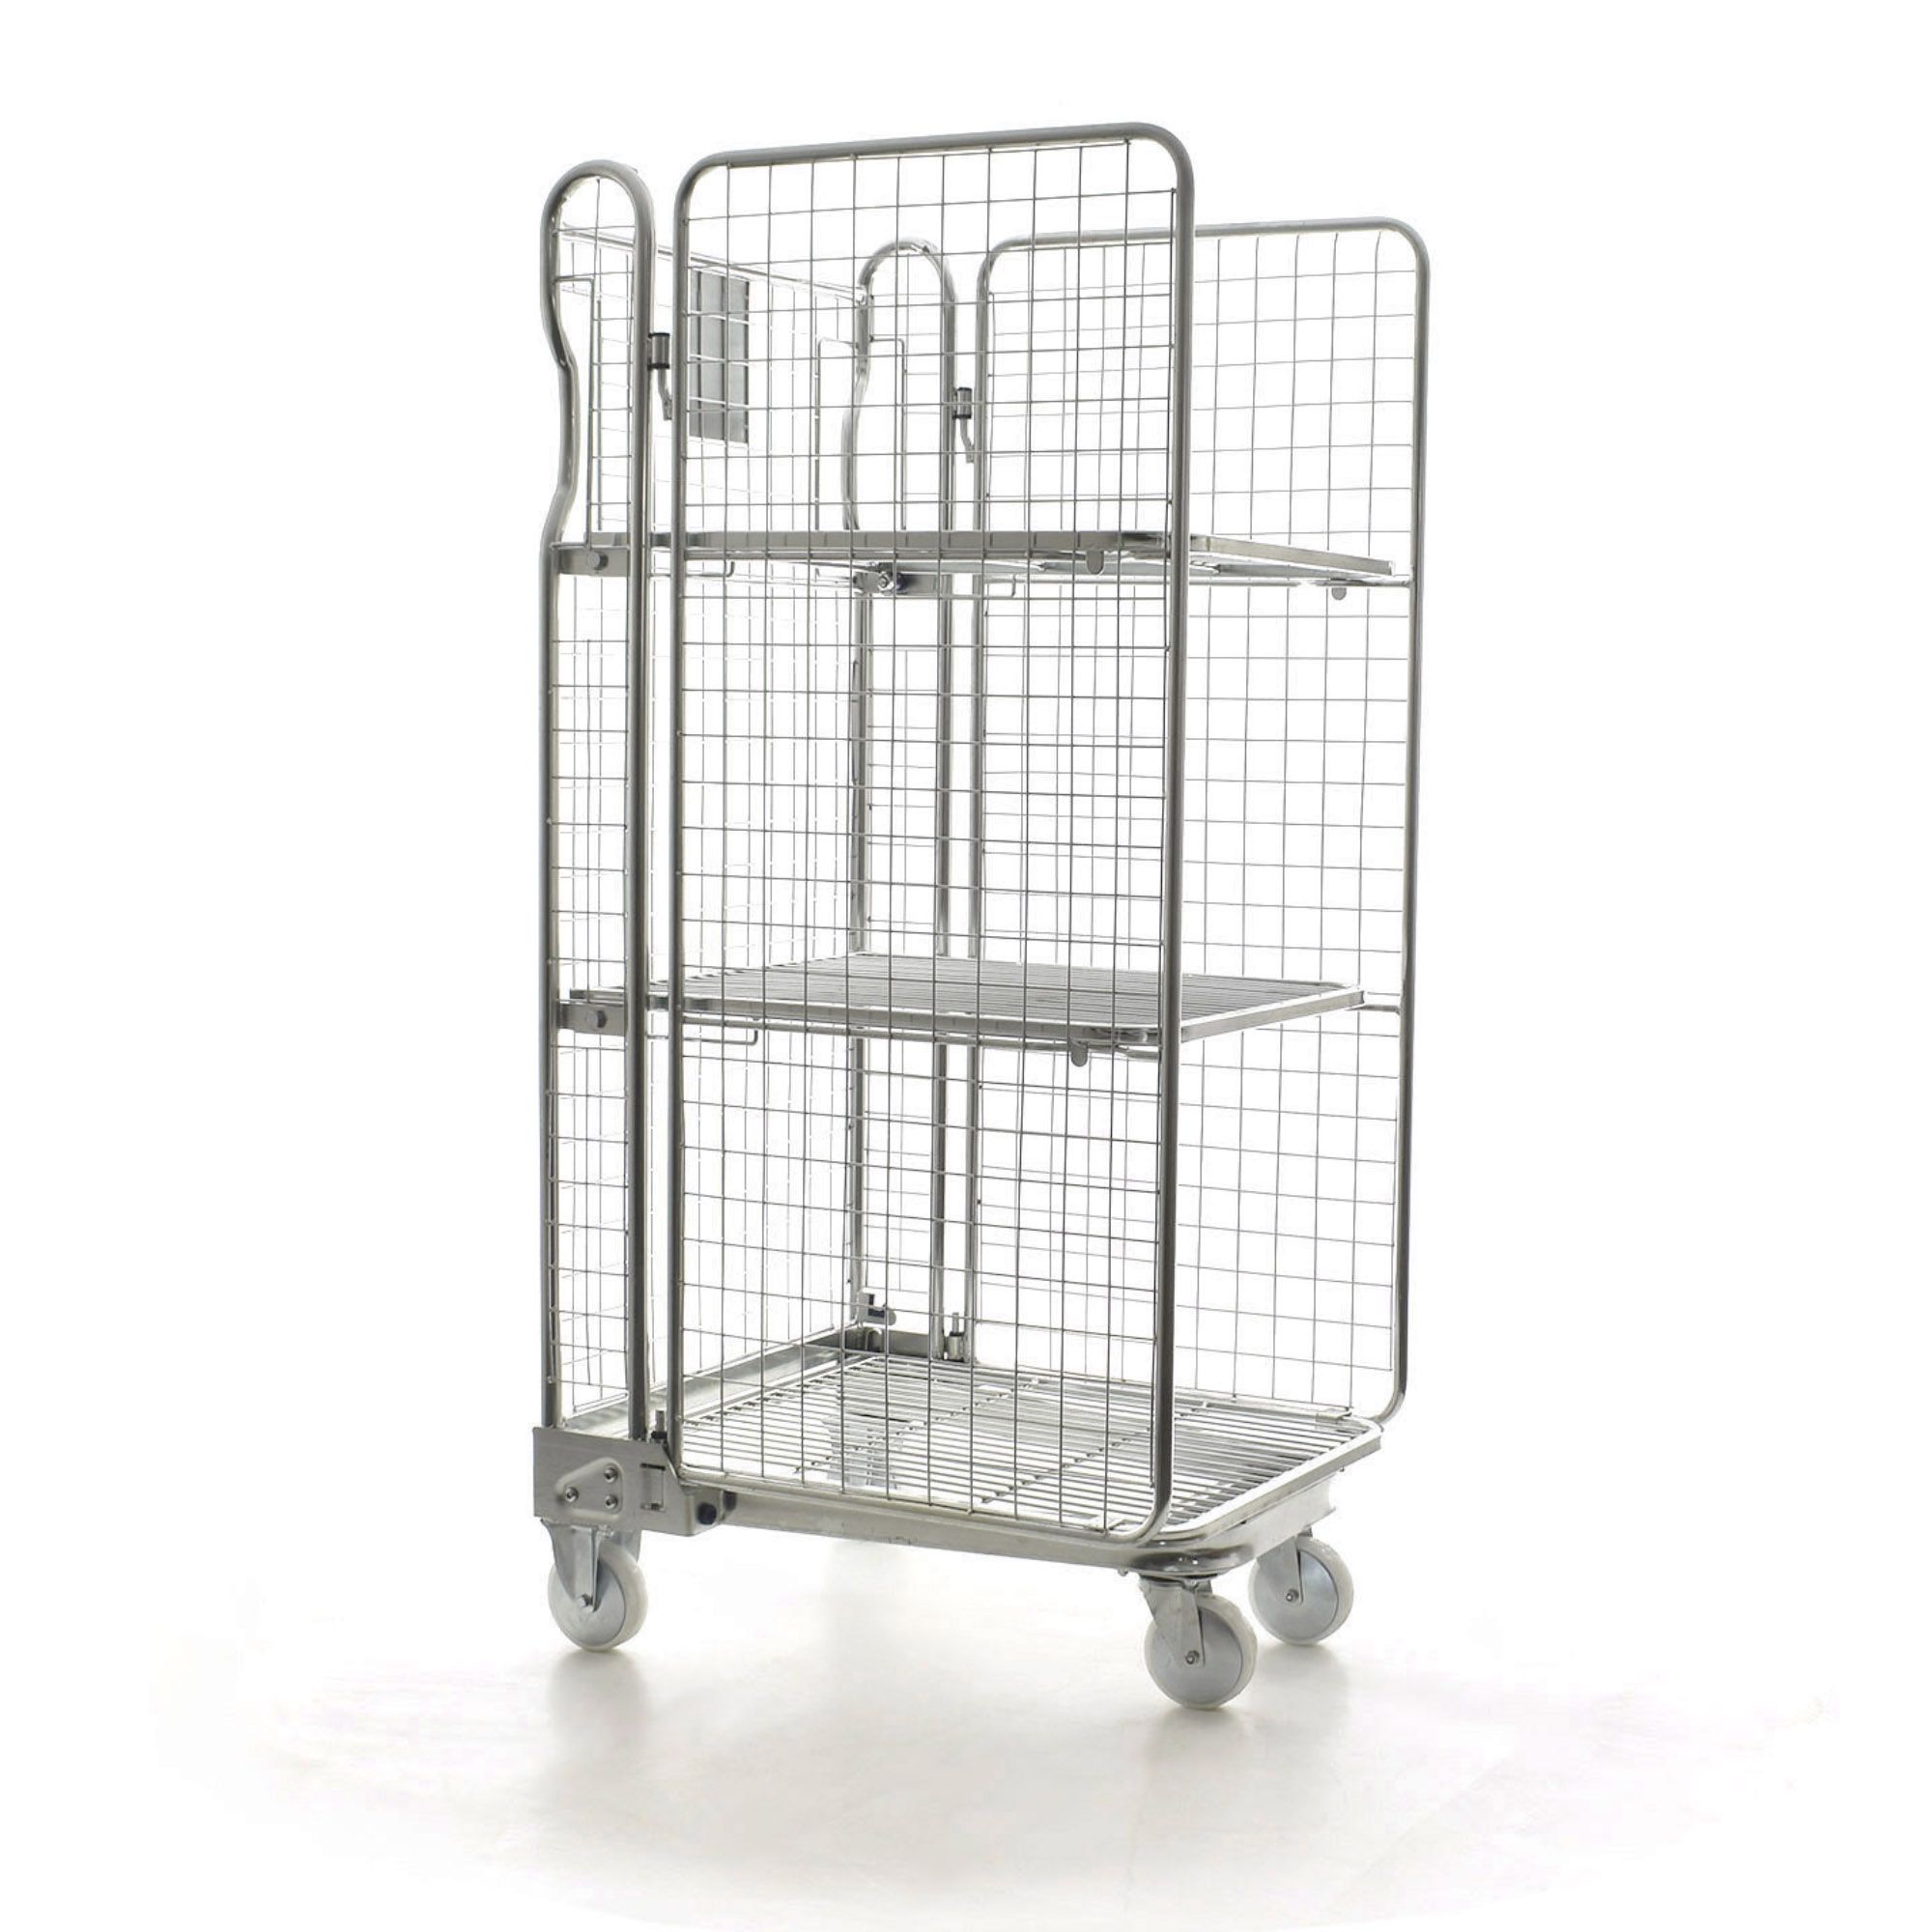 3 Sided A Frame Mesh With 2 Shelves